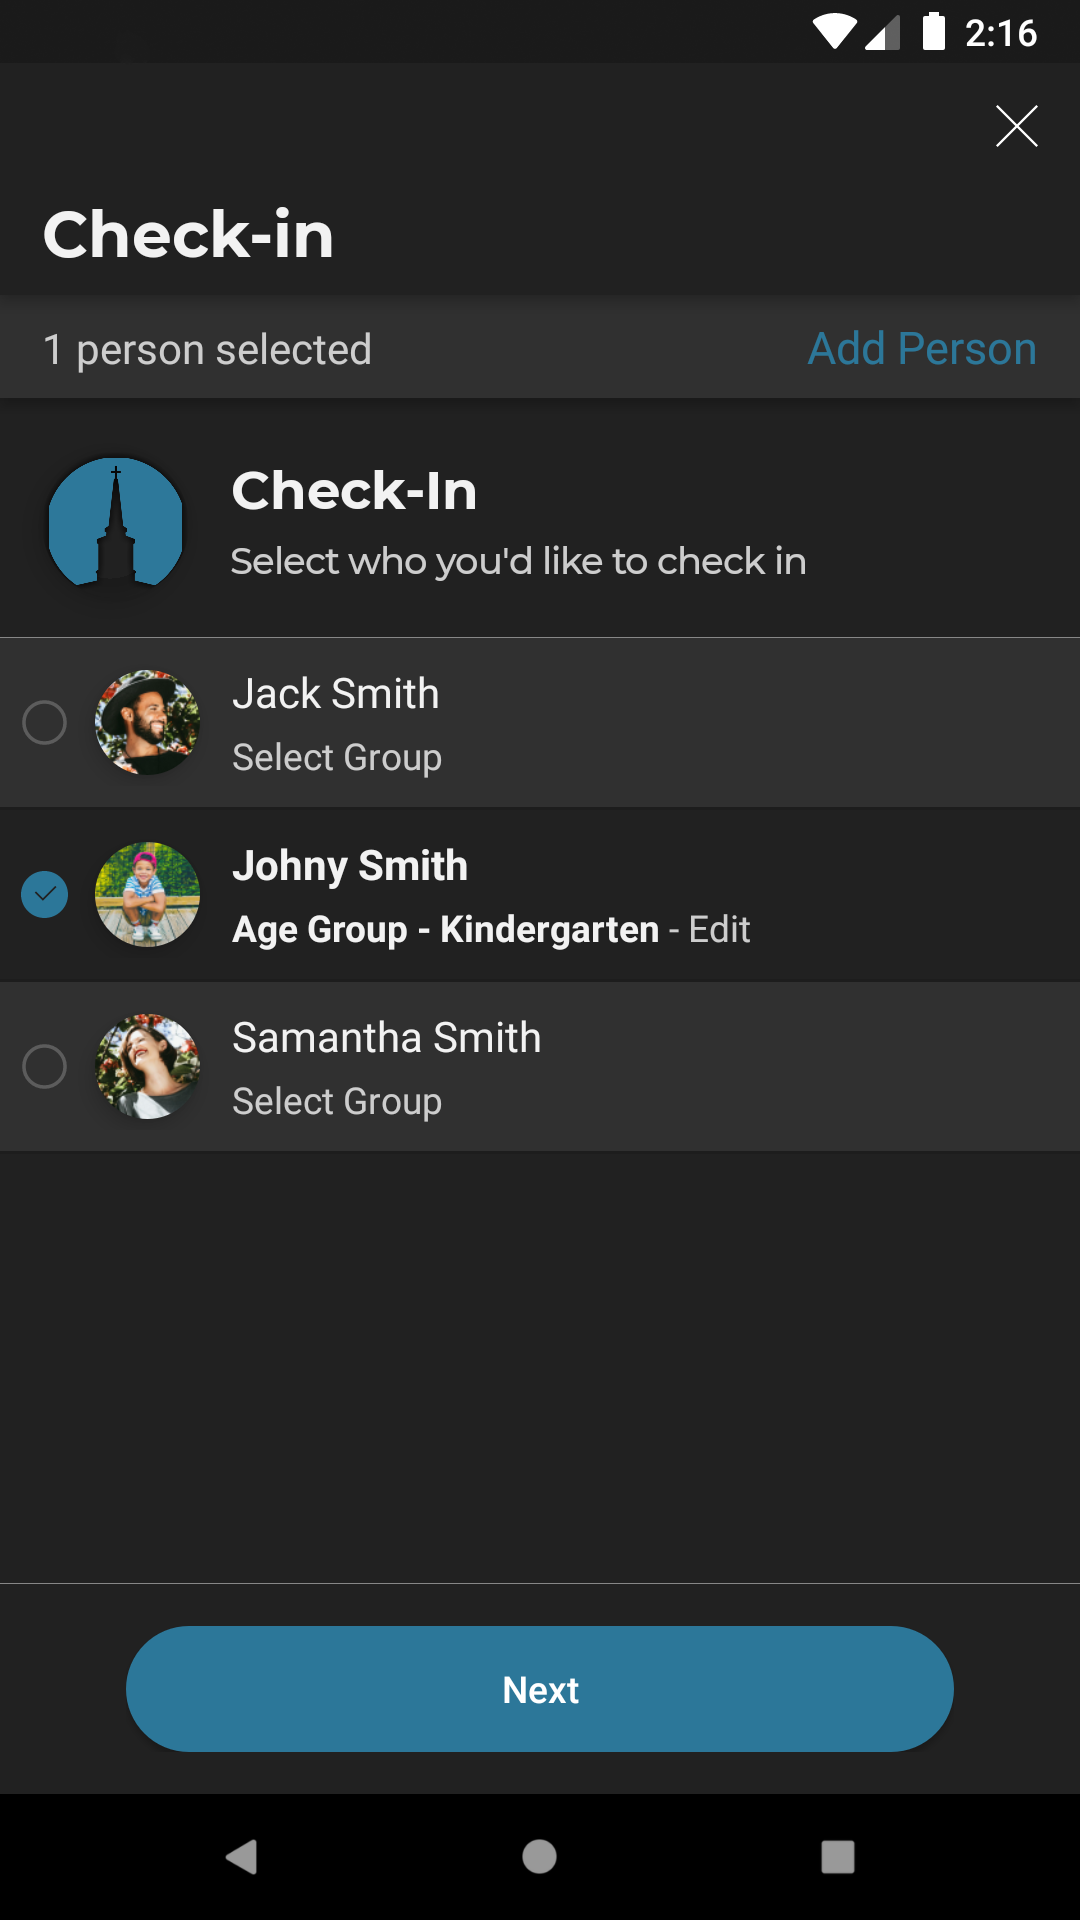 Mobile-App-checkin-family-members-complete.png